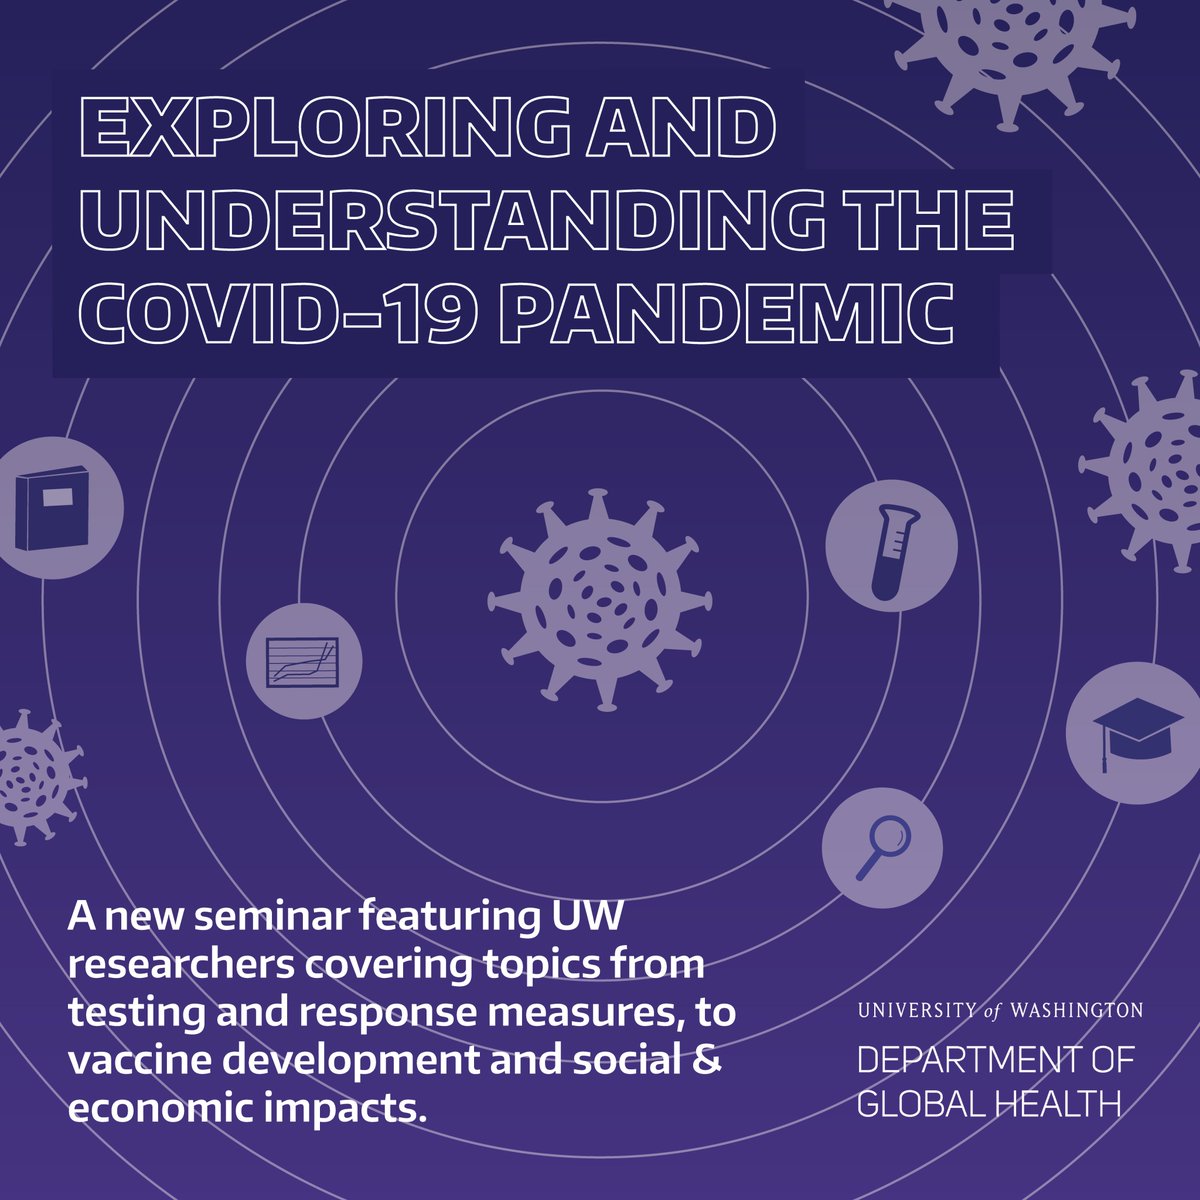 The Department of Global Health is offering an online course on the #COVID19 pandemic. This series will include lectures from multiple @UW researchers over the course of six sessions. For more information, visit globalhealth.washington.edu/exploring-and-…